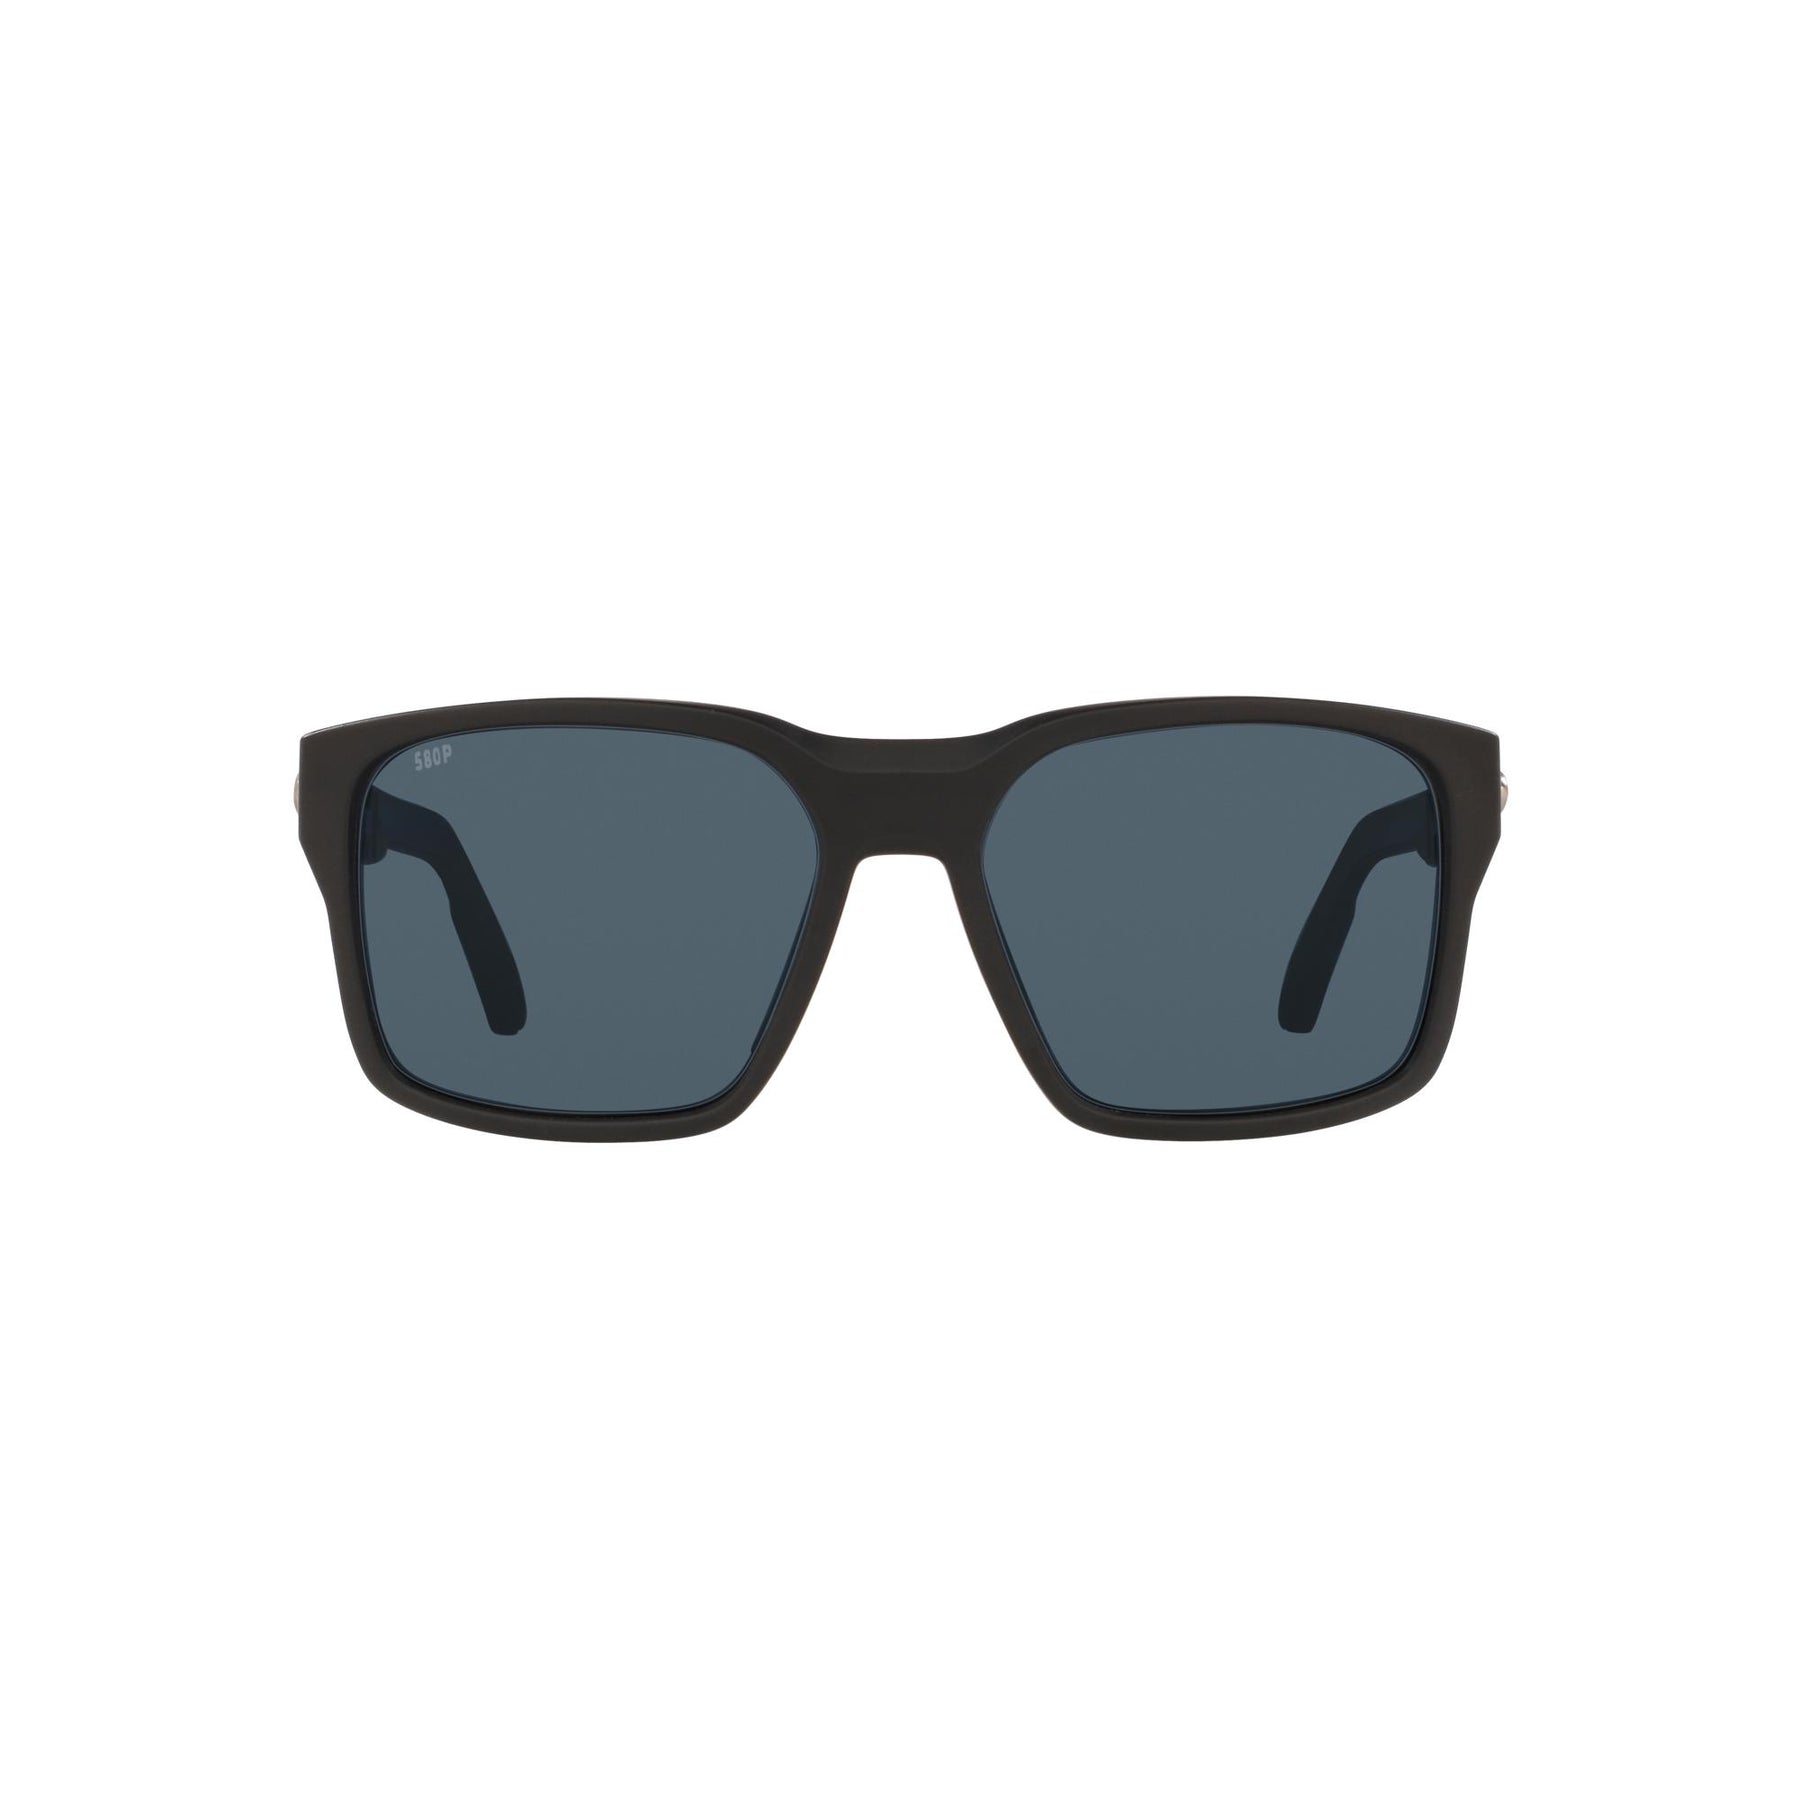 View of Sunglasses Costa Tailwalker Matte Black Gray 580P available at EZOKO Pike and Musky Shop